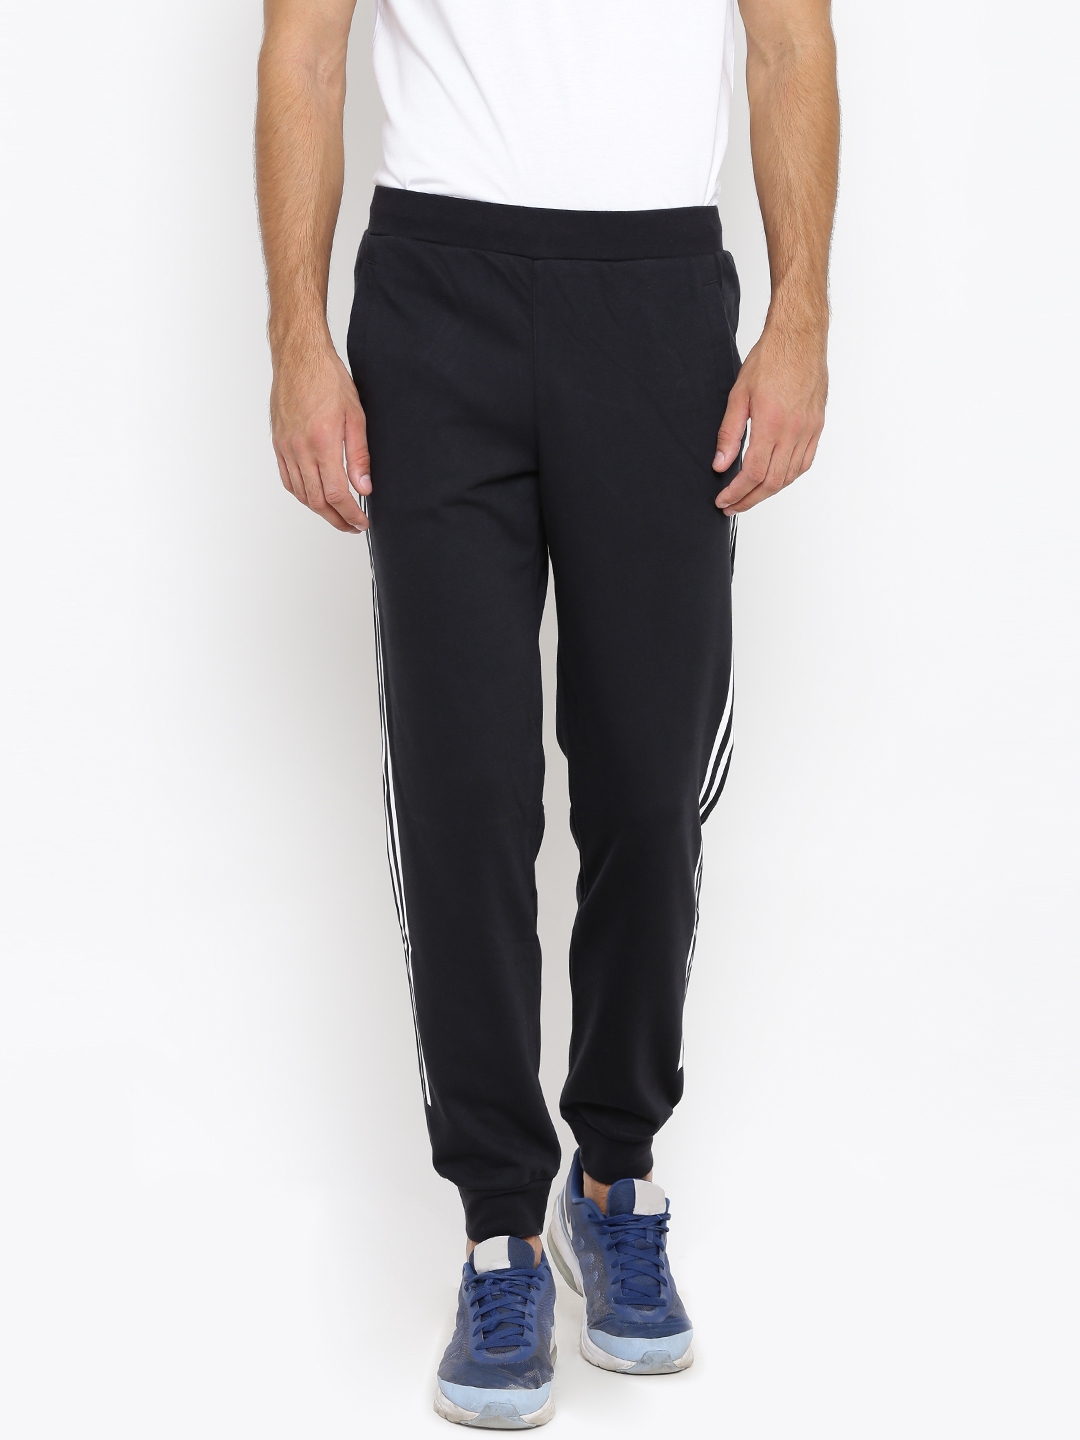 Buy ADIDAS NEO Black FRN TP Joggers - Track Pants for Men 2022994 | Myntra